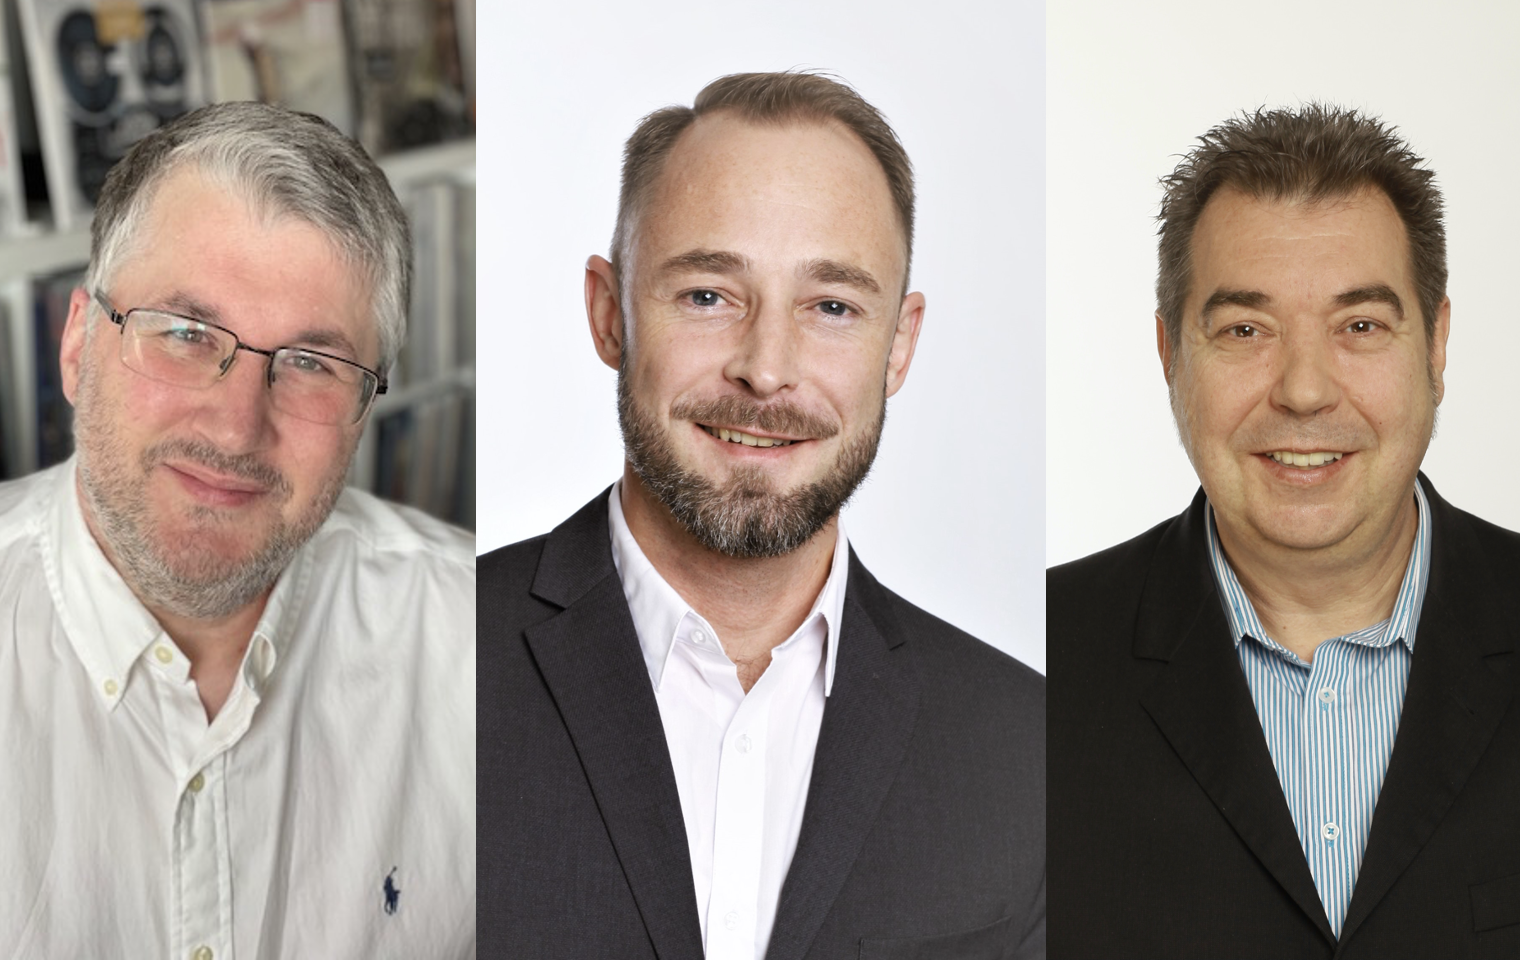 The new NeedScope and Strategy Team at Bonsai-Research: Thomas Hoch, Manuel Otte and Joachim Odendahl.